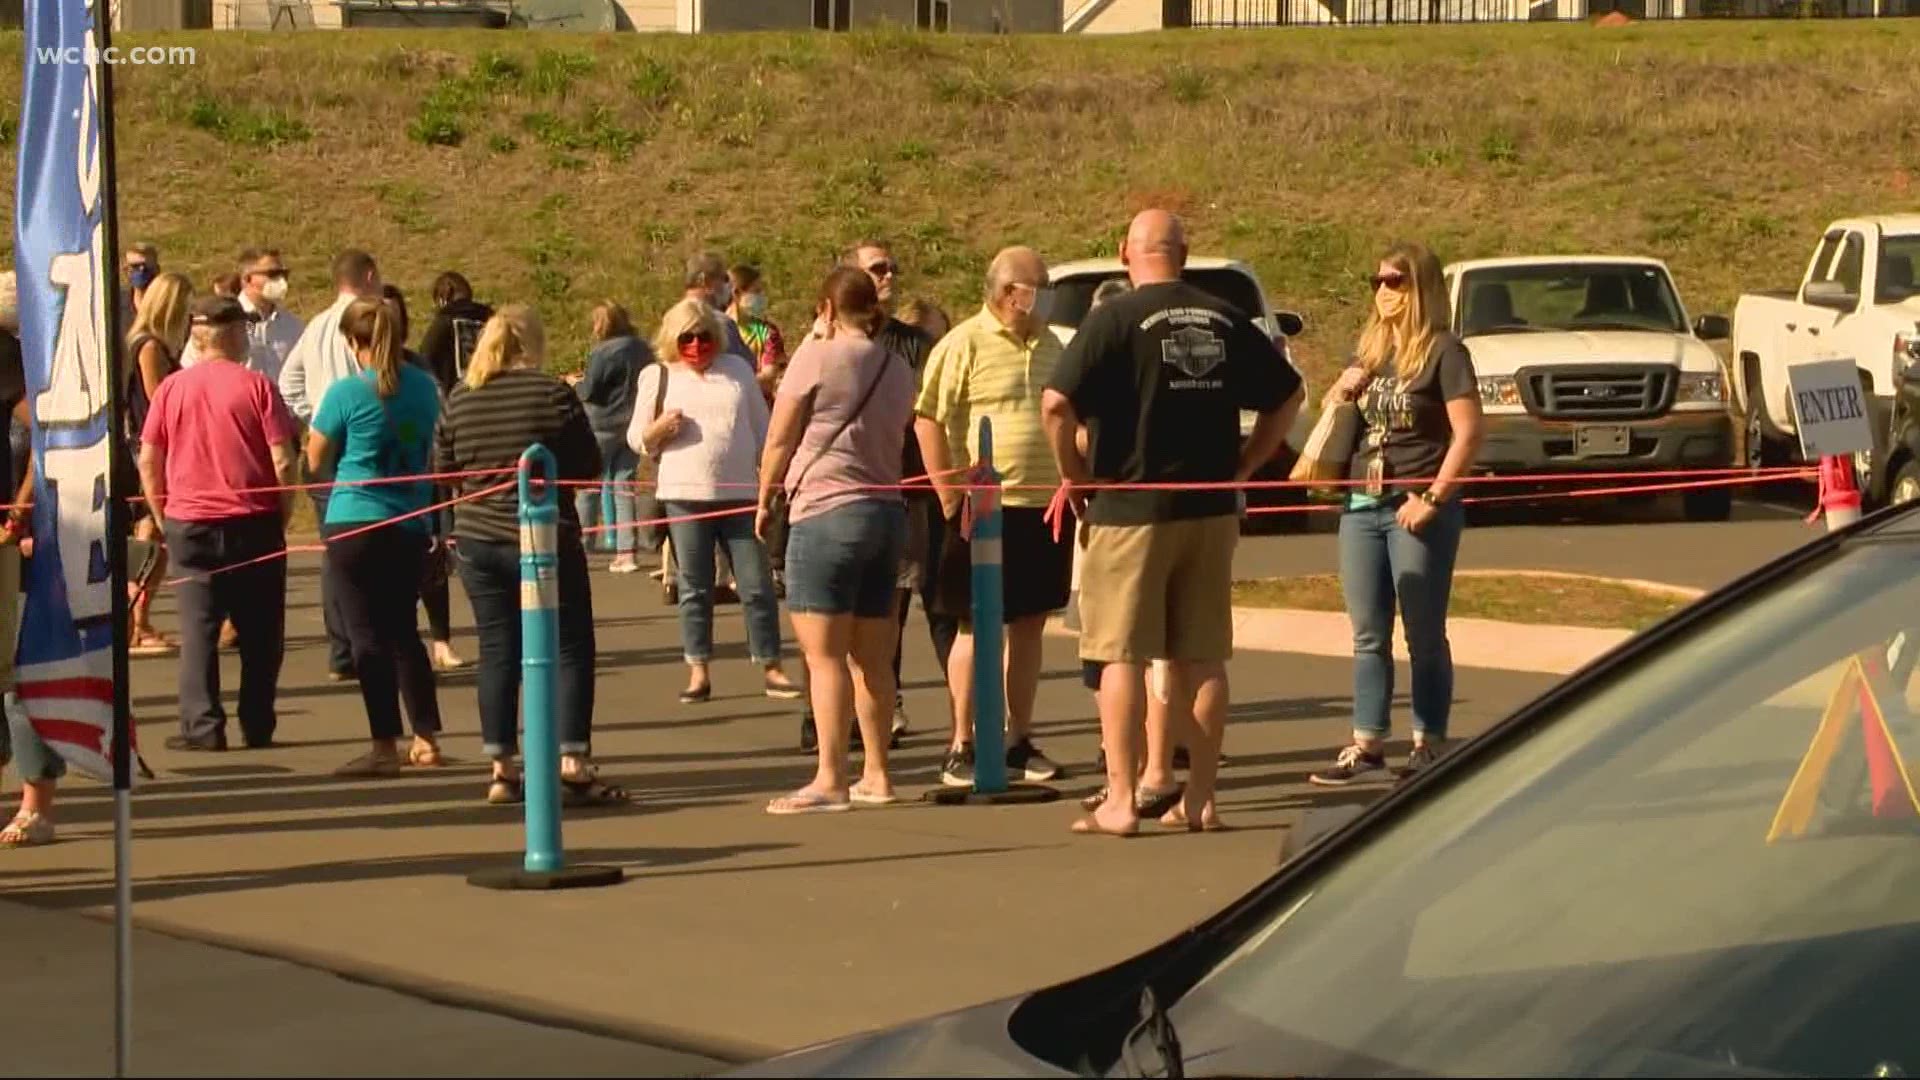 South Carolina continues to break records with voting lines almost 2 hours long.